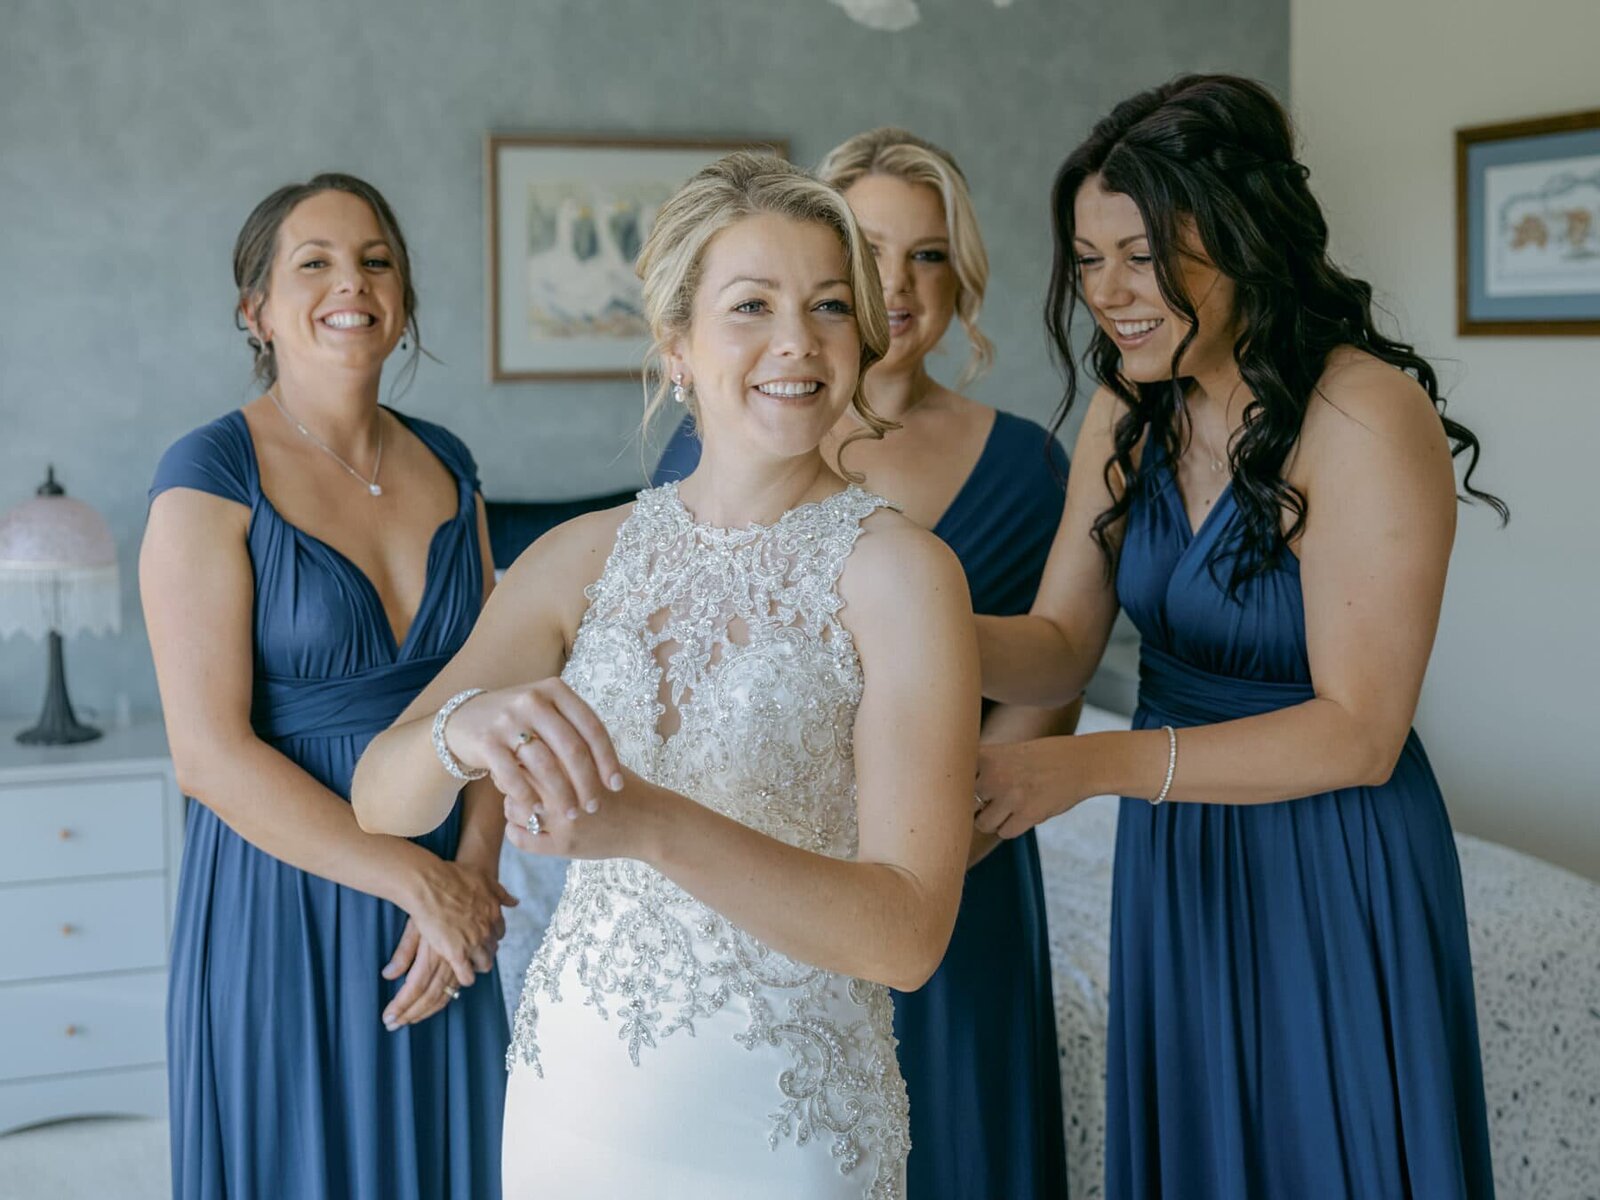 Stones of the Yarra Valley wedding - Serenity Photography 38